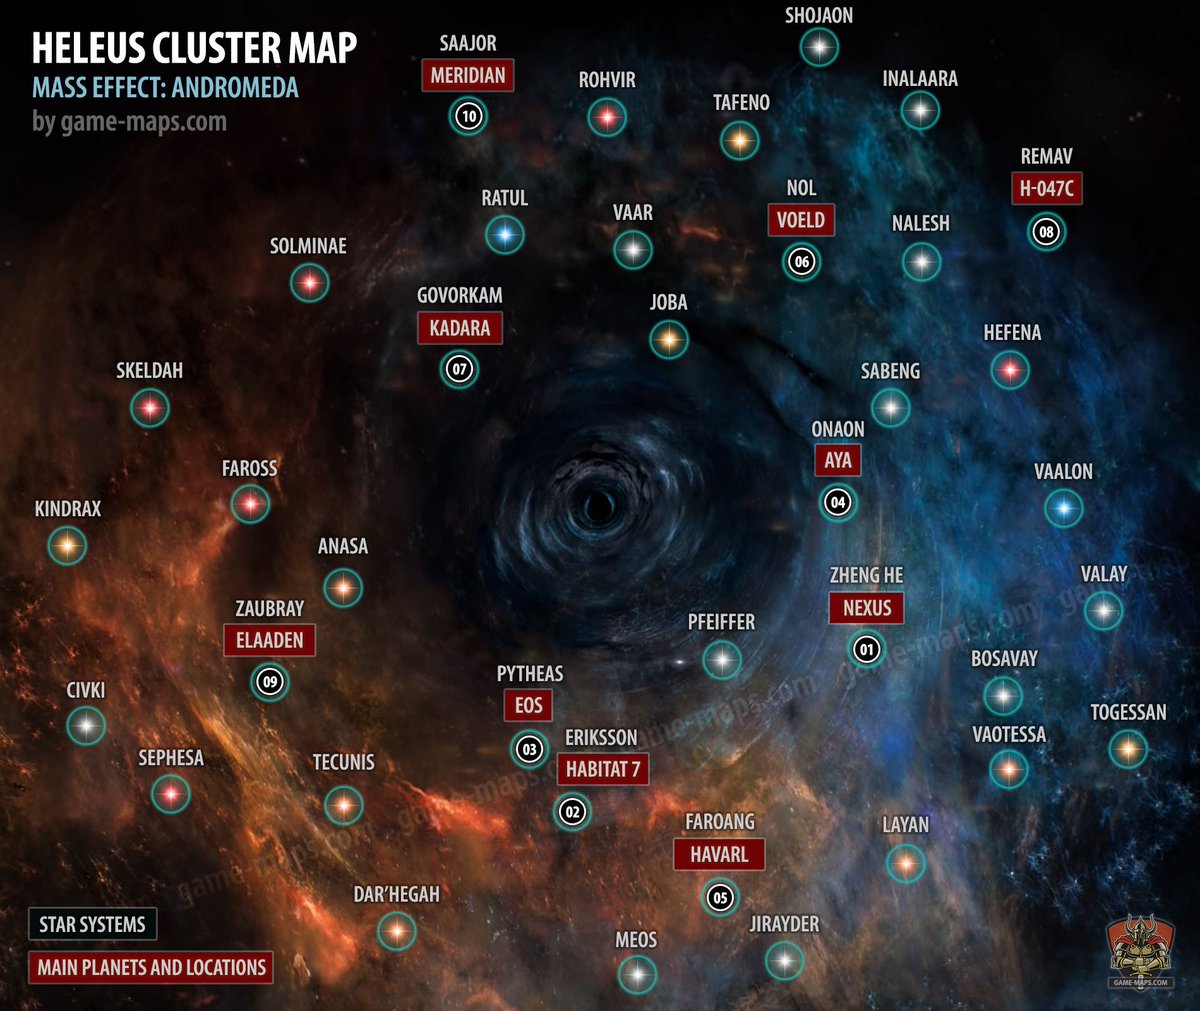 Mass Effect Andromeda : Heleus Cluster Map